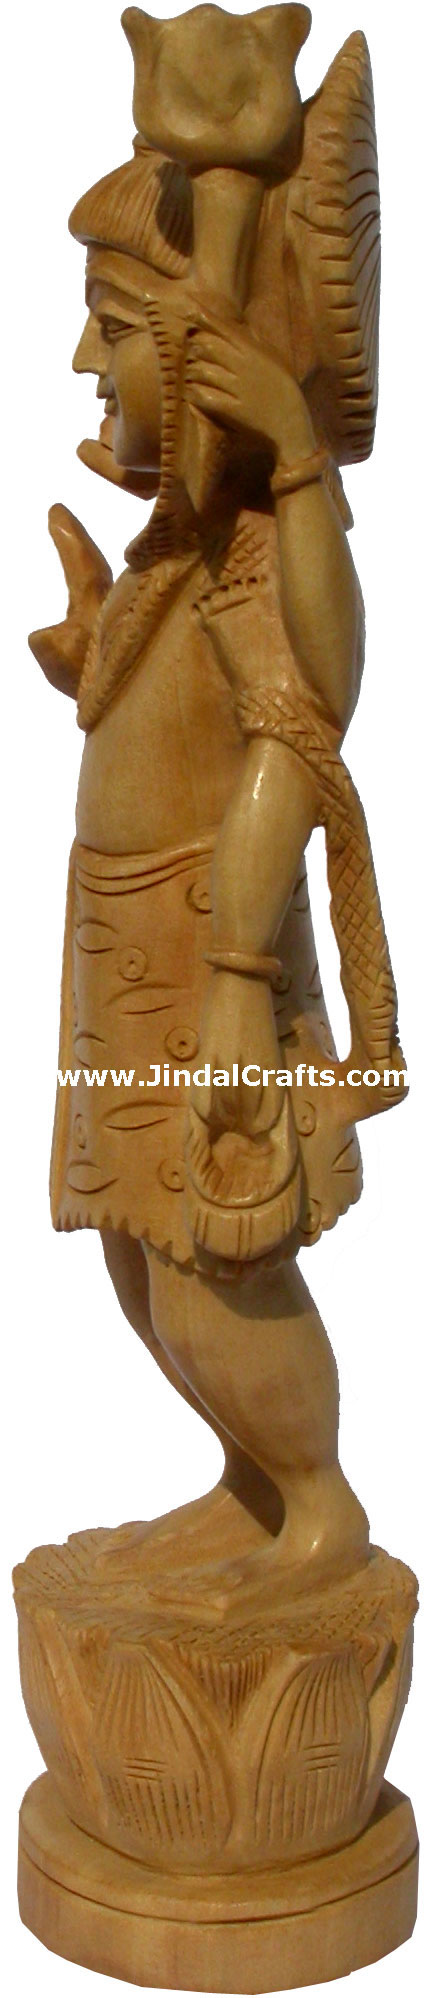 Wood Sculpture Lord Shiva Hand Made Statue Hinduism Indian Carving Home Decor